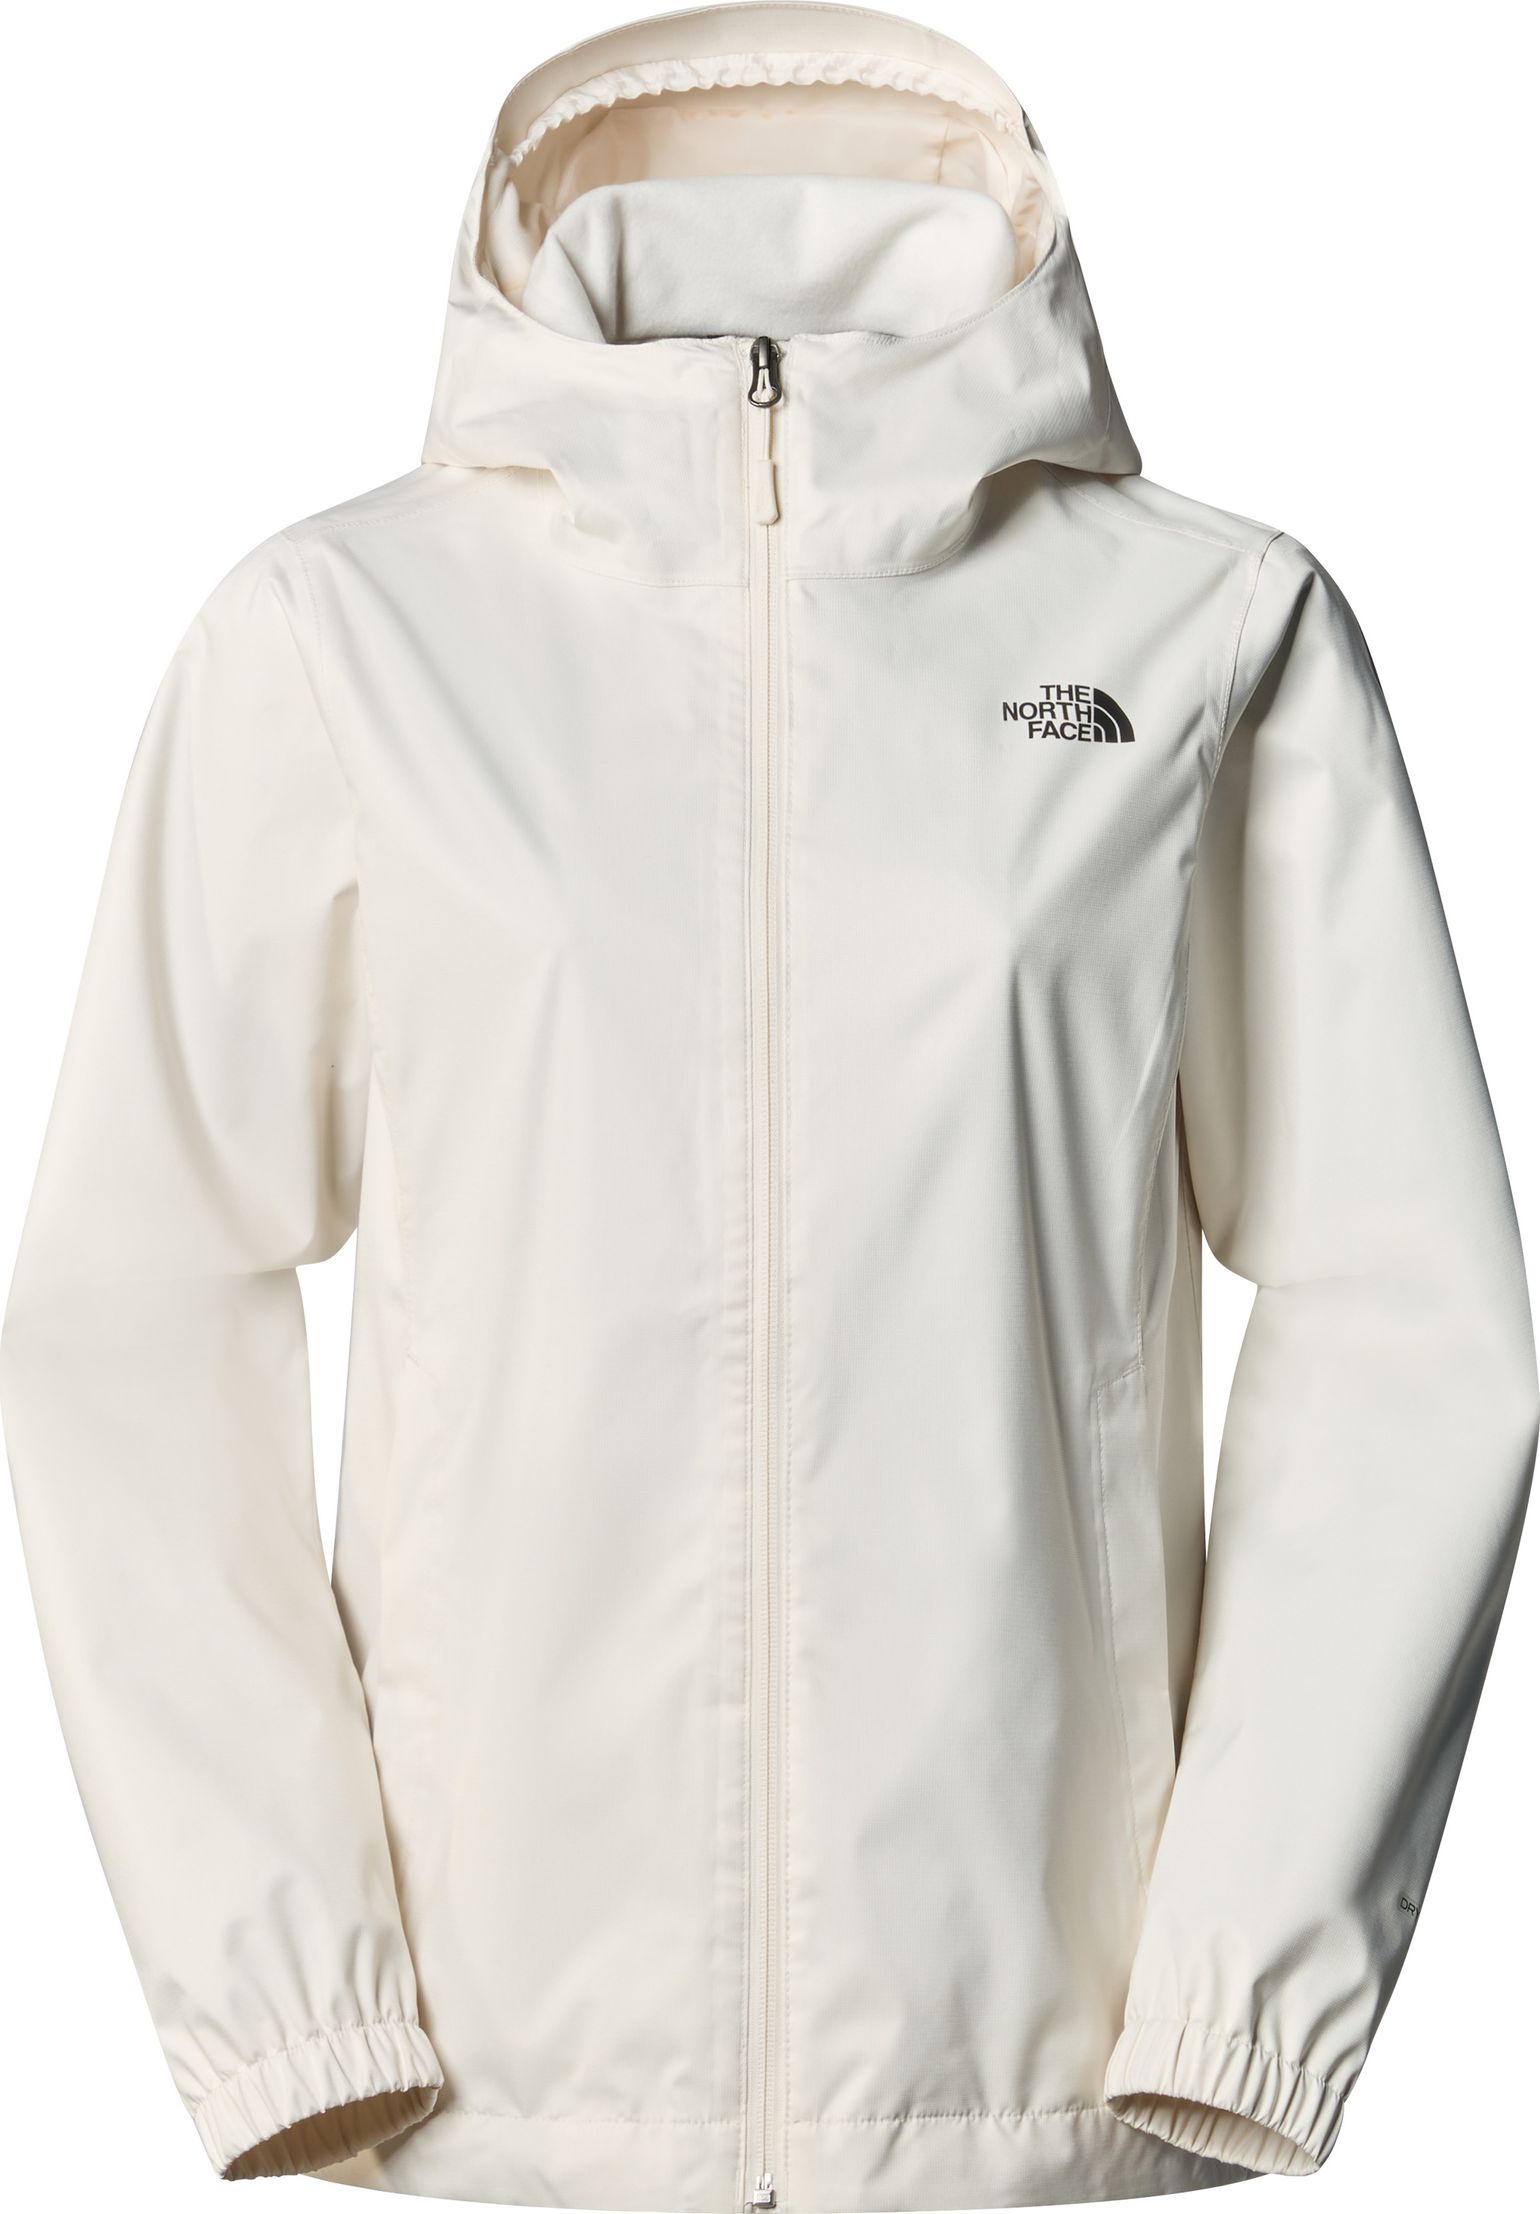 The North Face Women's Quest Jacket White Dune